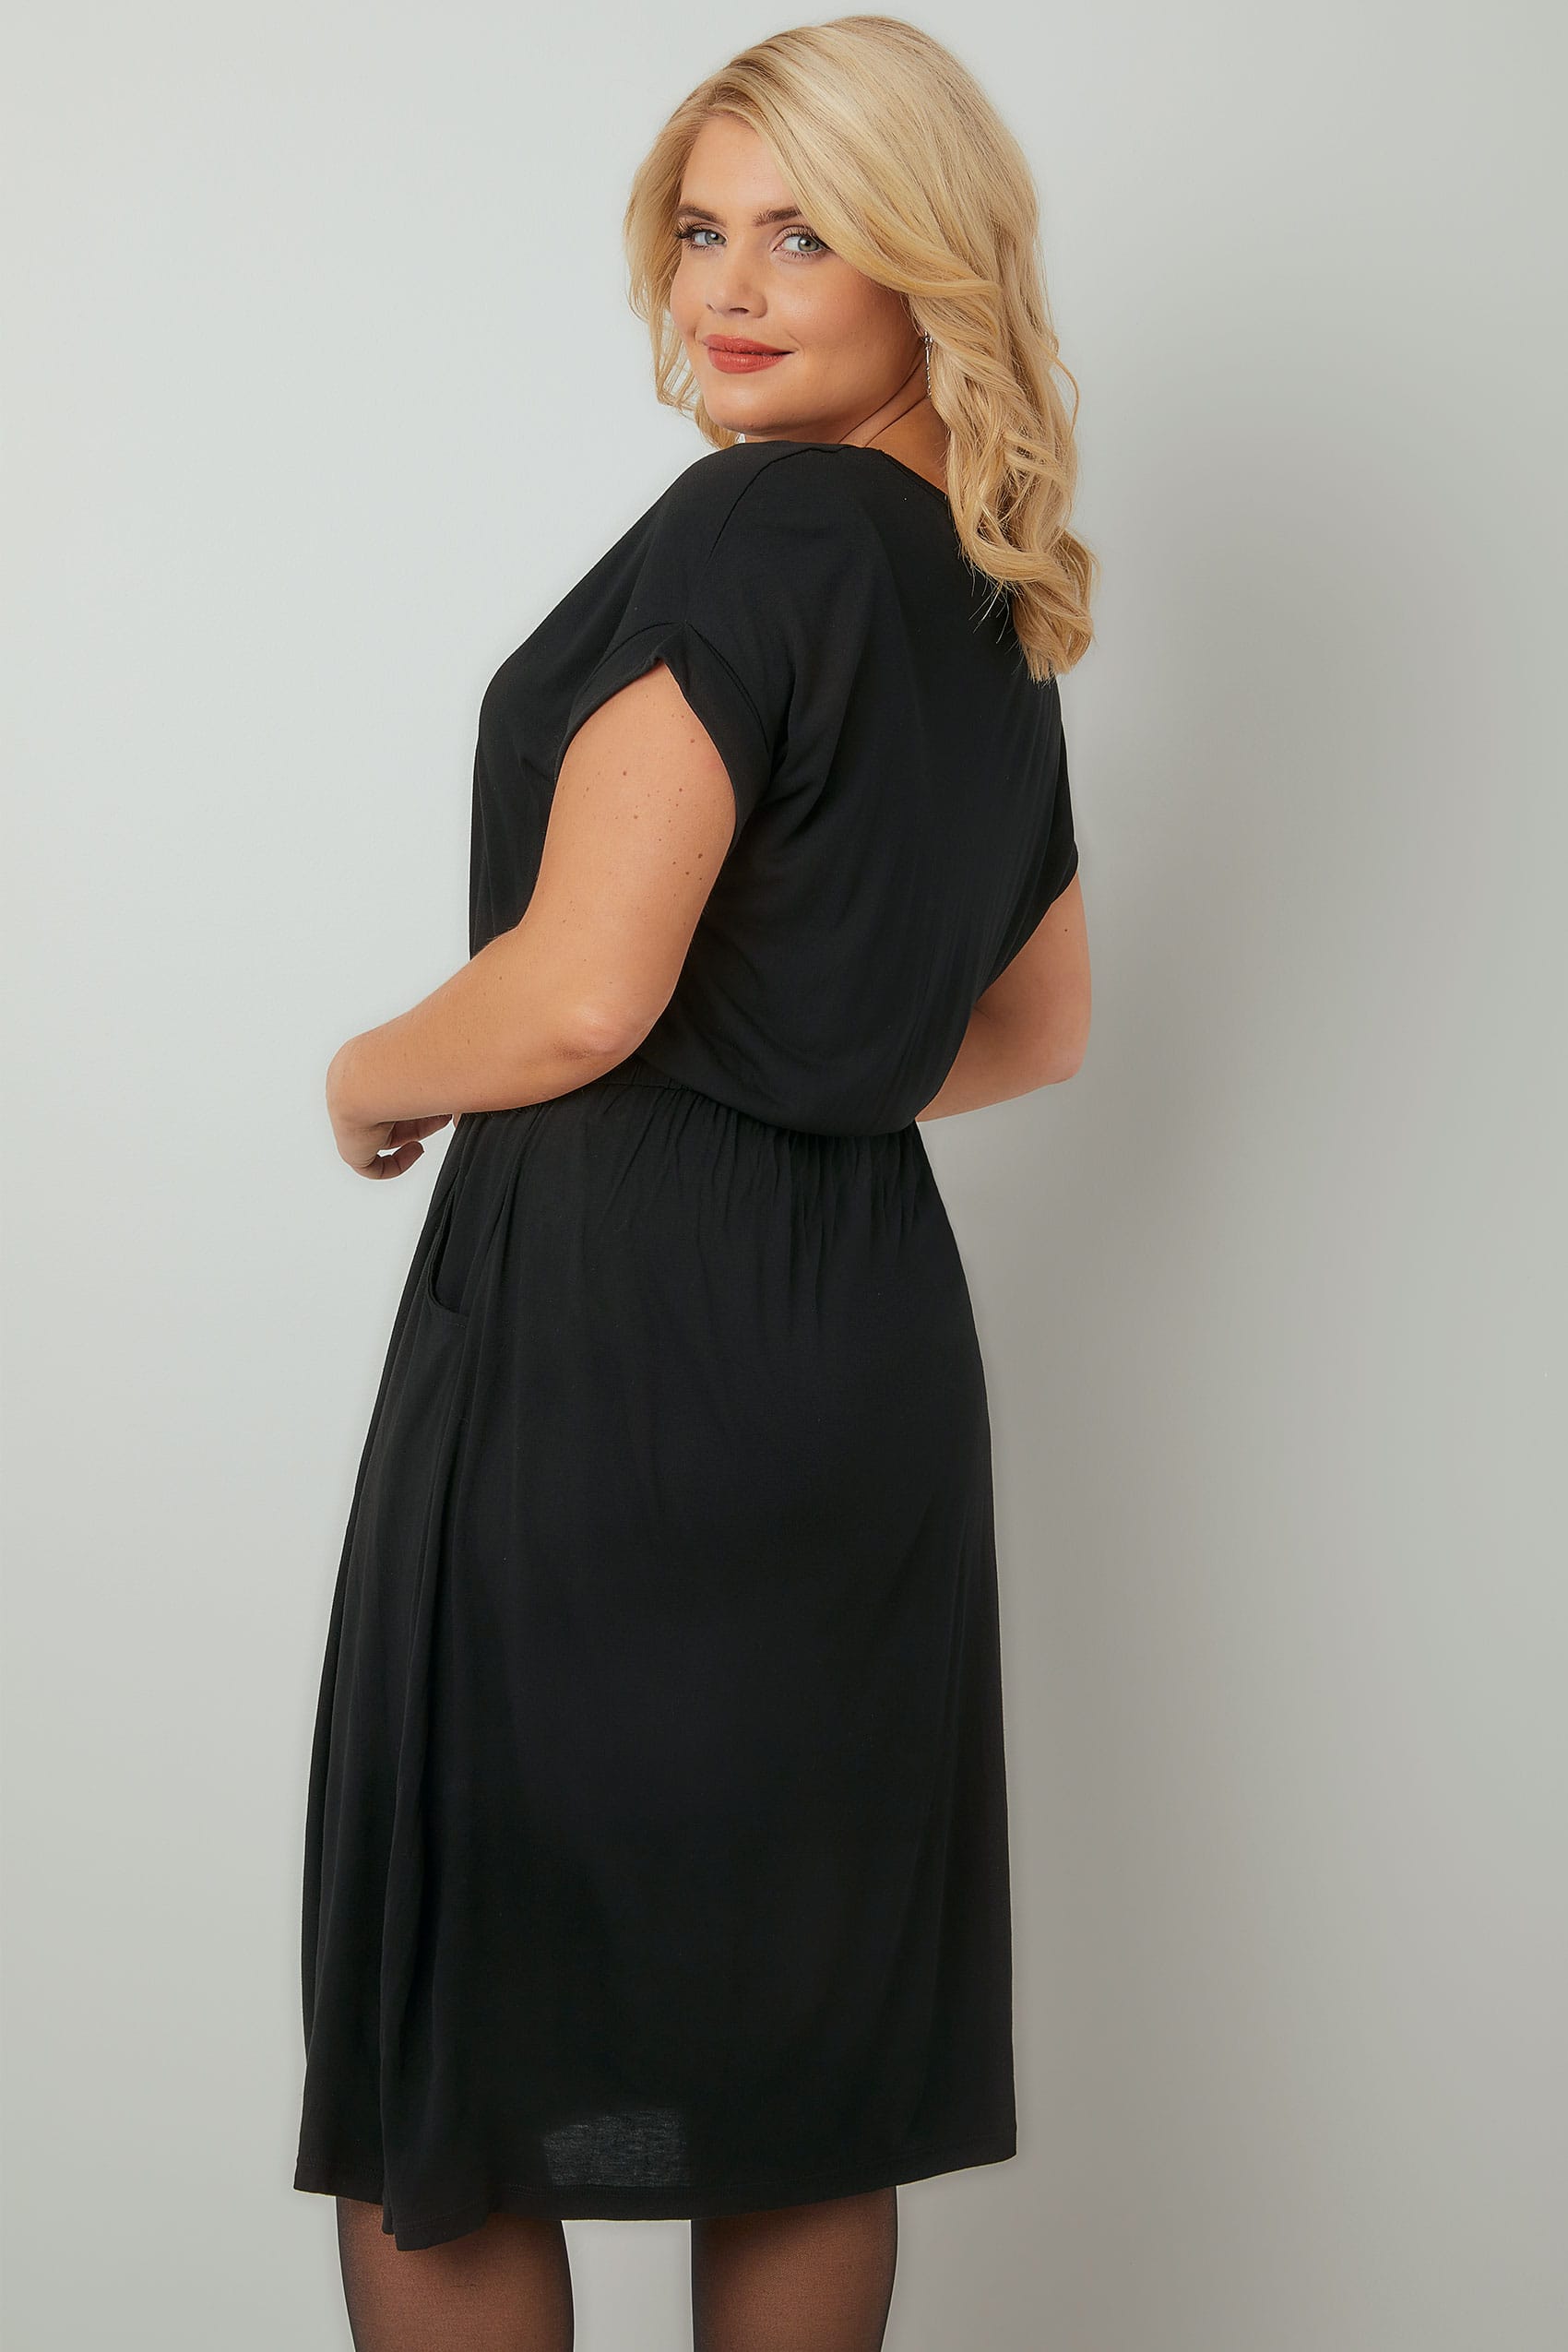 Black T-Shirt Dress With Pockets & Elasticated Waistband plus size 16 to 36